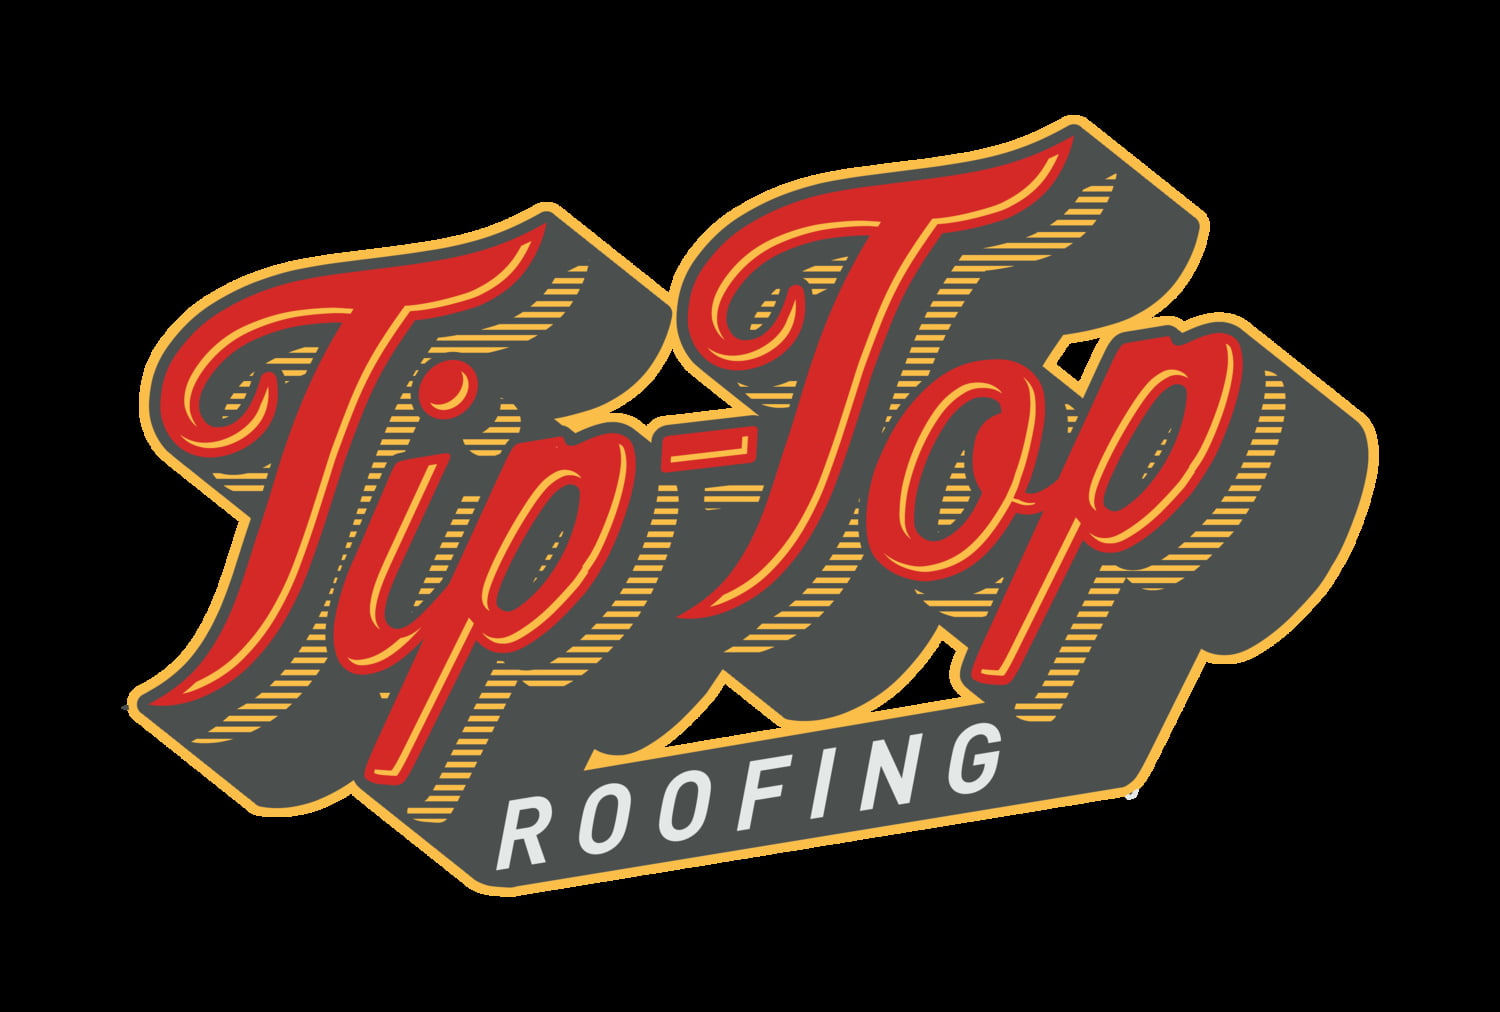 Tip-Top Roofing roofing company in Kentucky